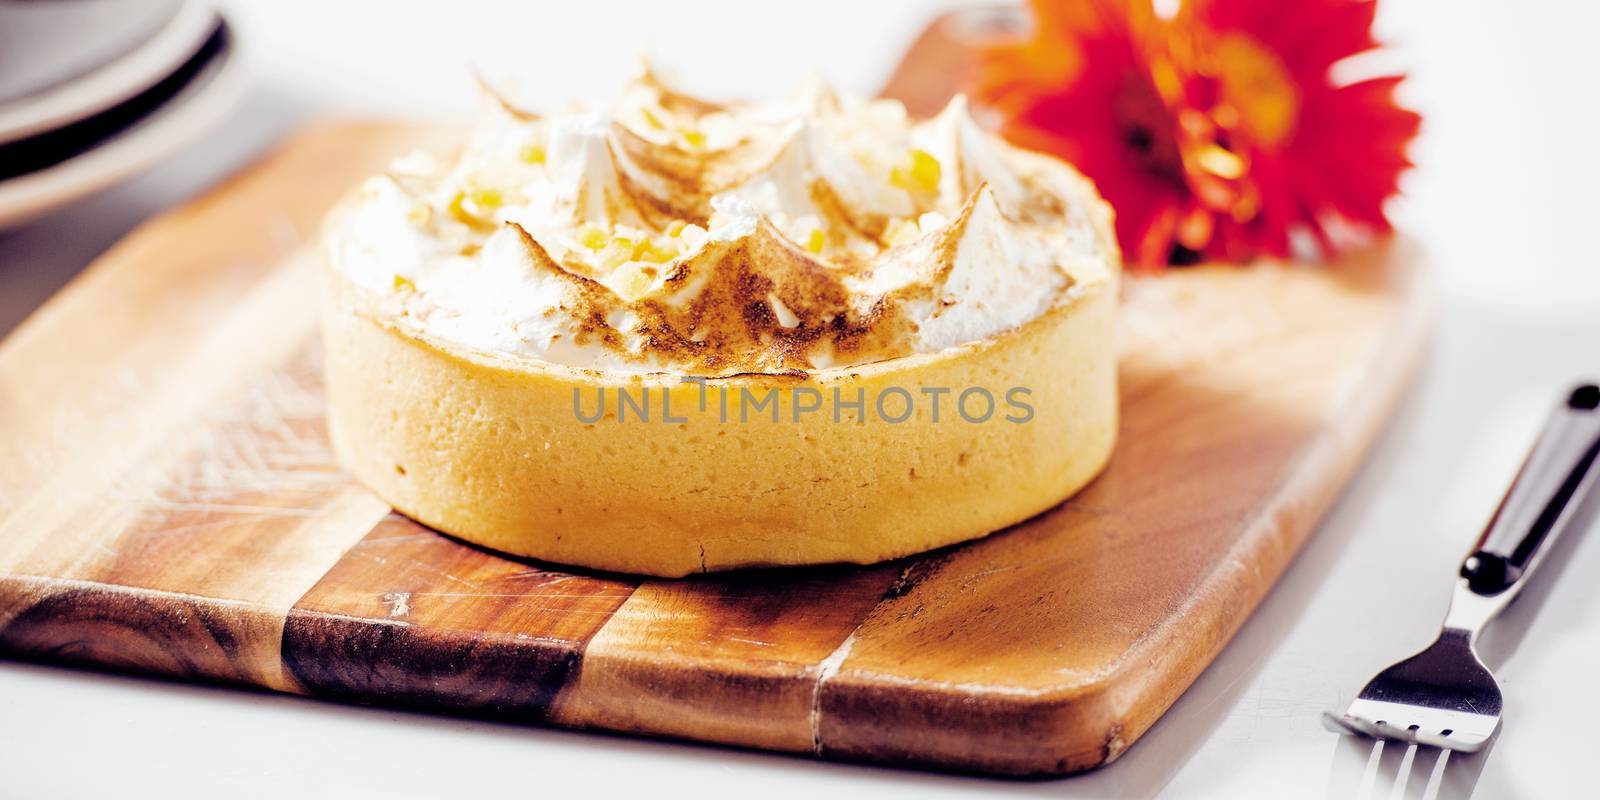 Lemon meringue pie on a timber board with a flower and plate in the background